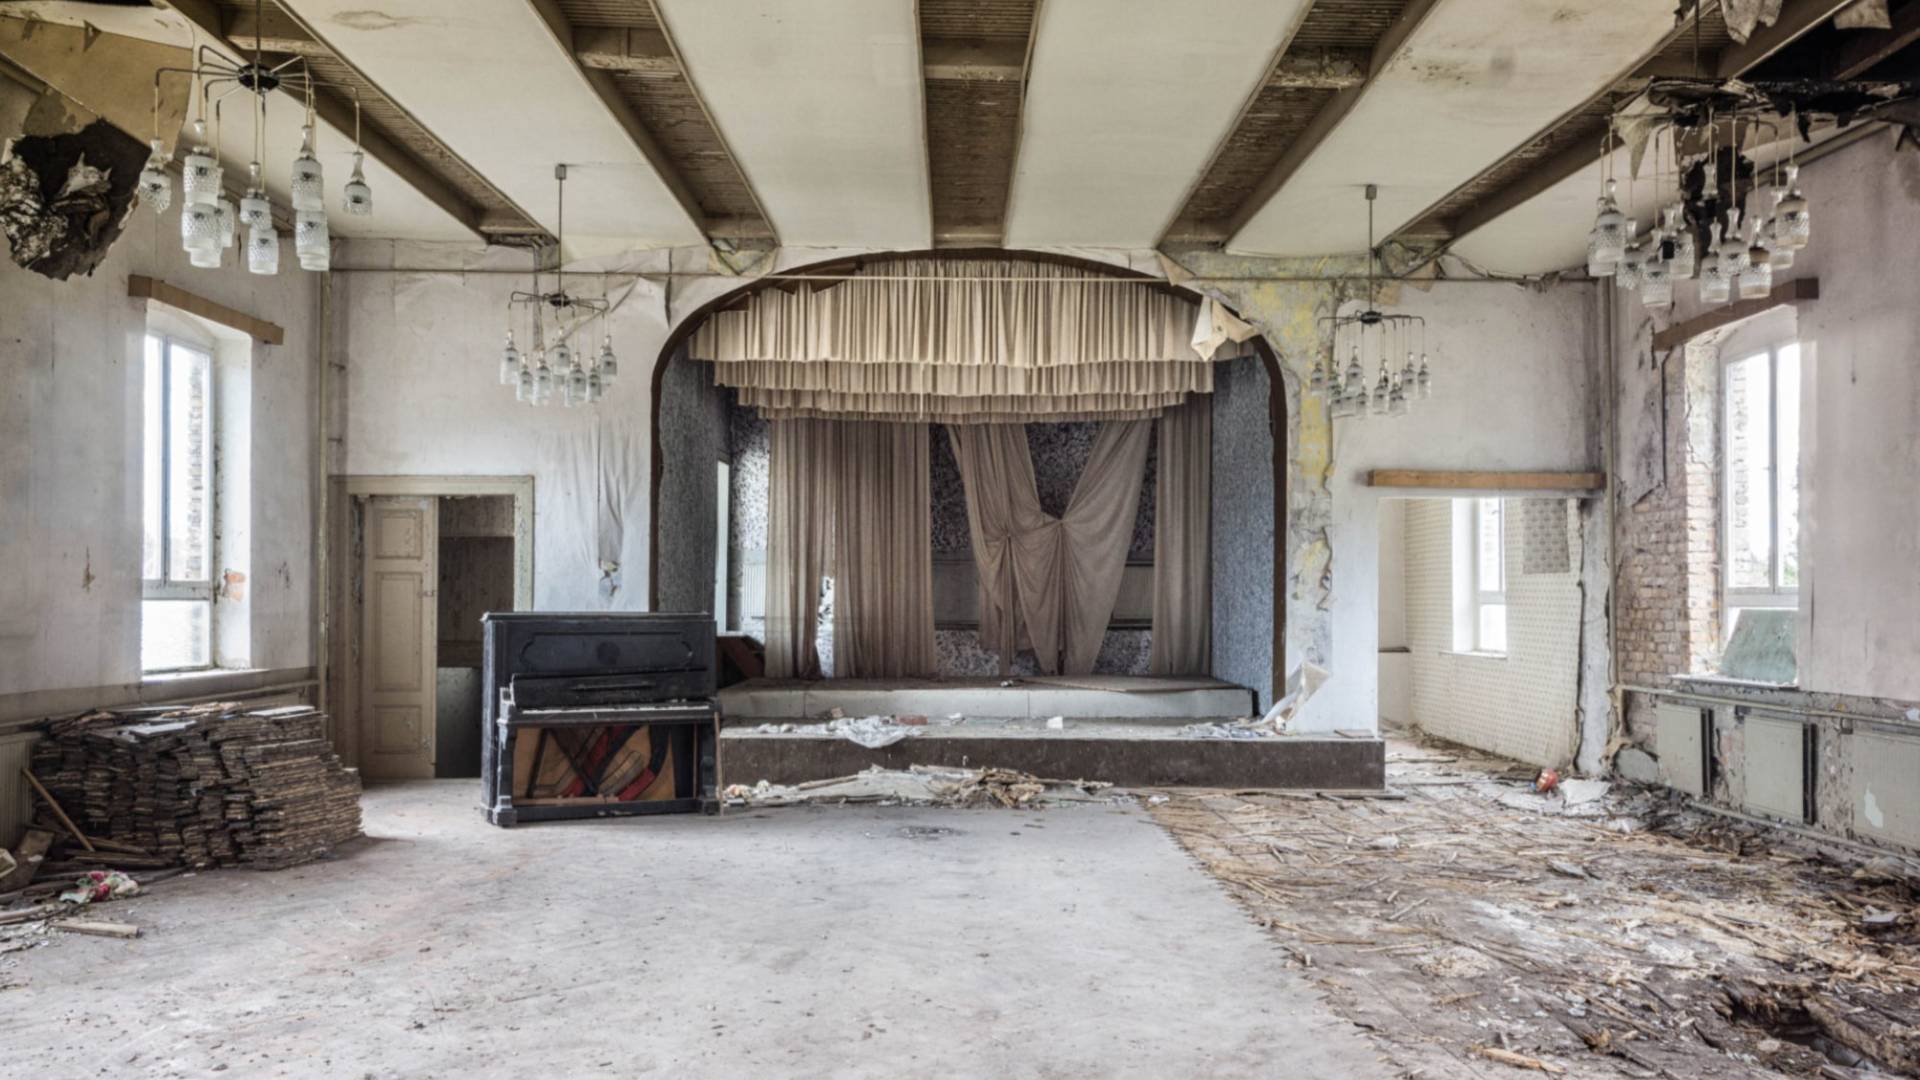 Piano sits in abandoned room in front of stage.